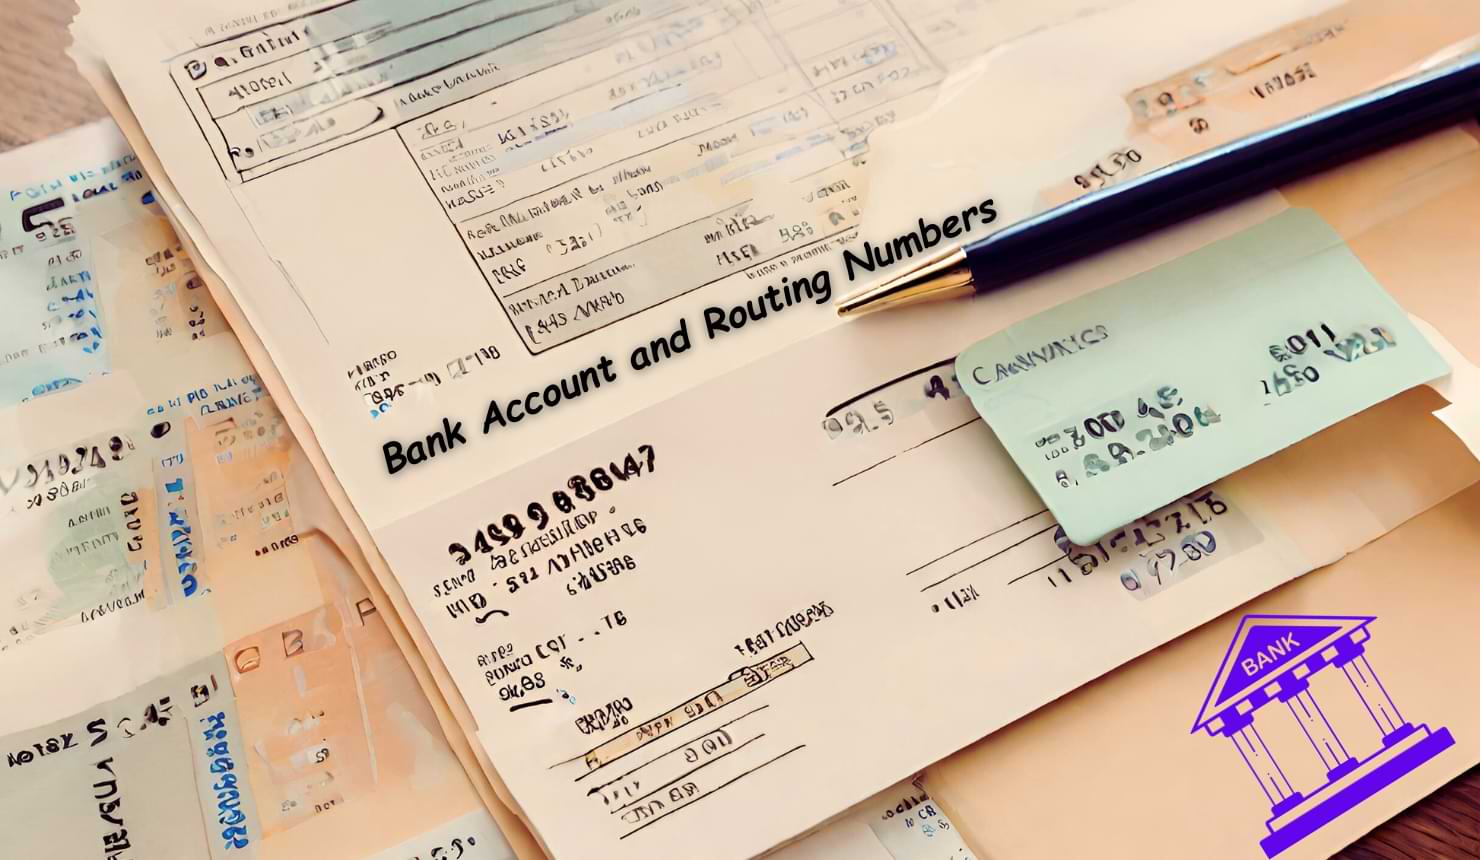 Bank Account and Routing Numbers